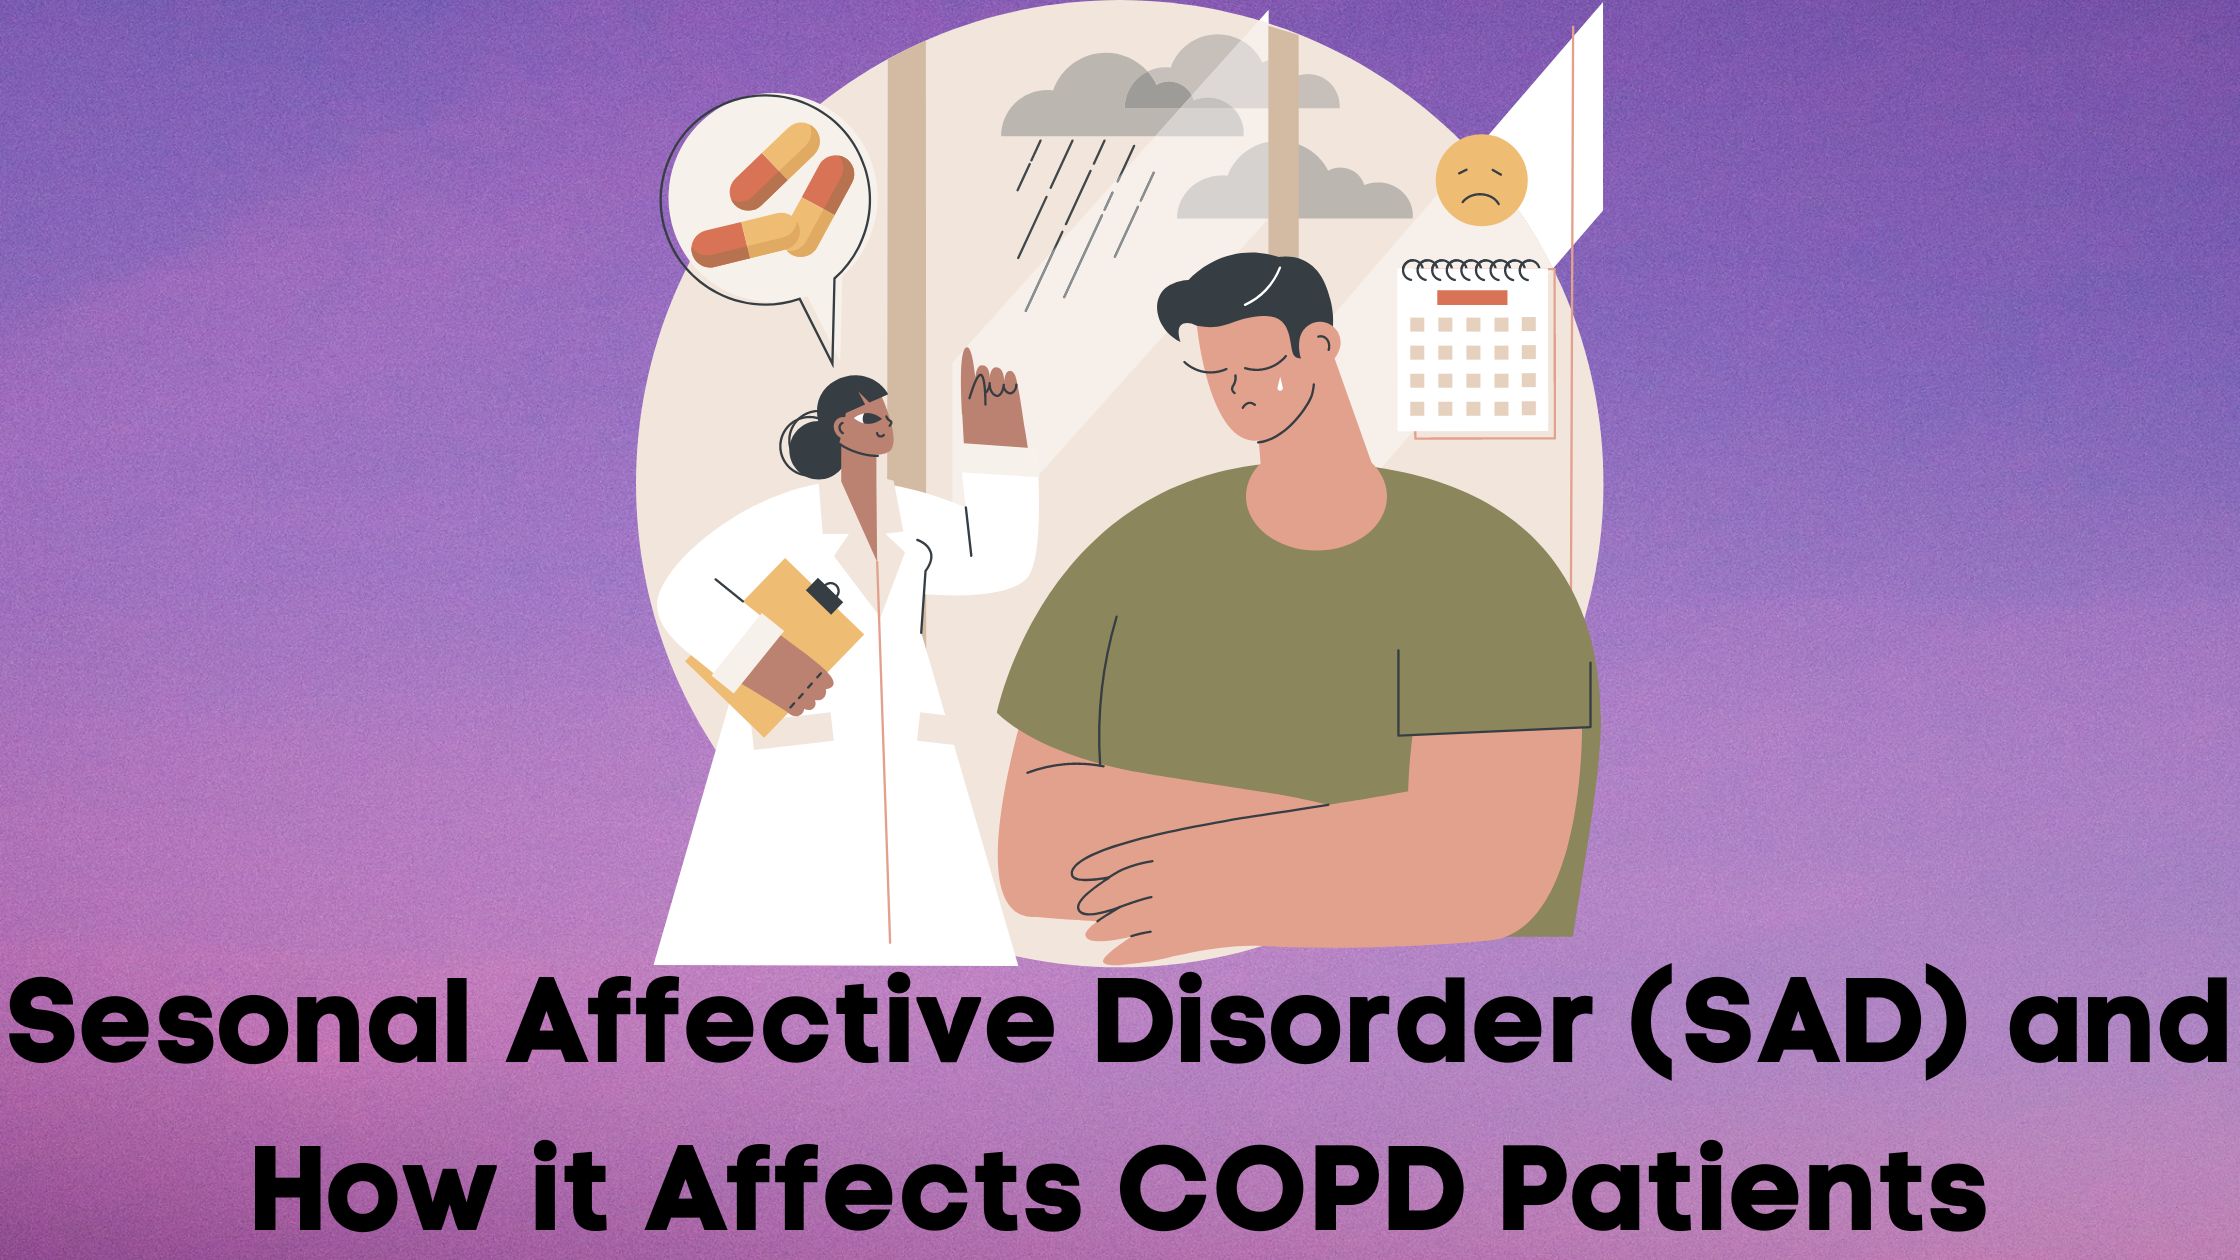 Sesonal Affective Disorder (SAD) and How it Affects COPD Patients